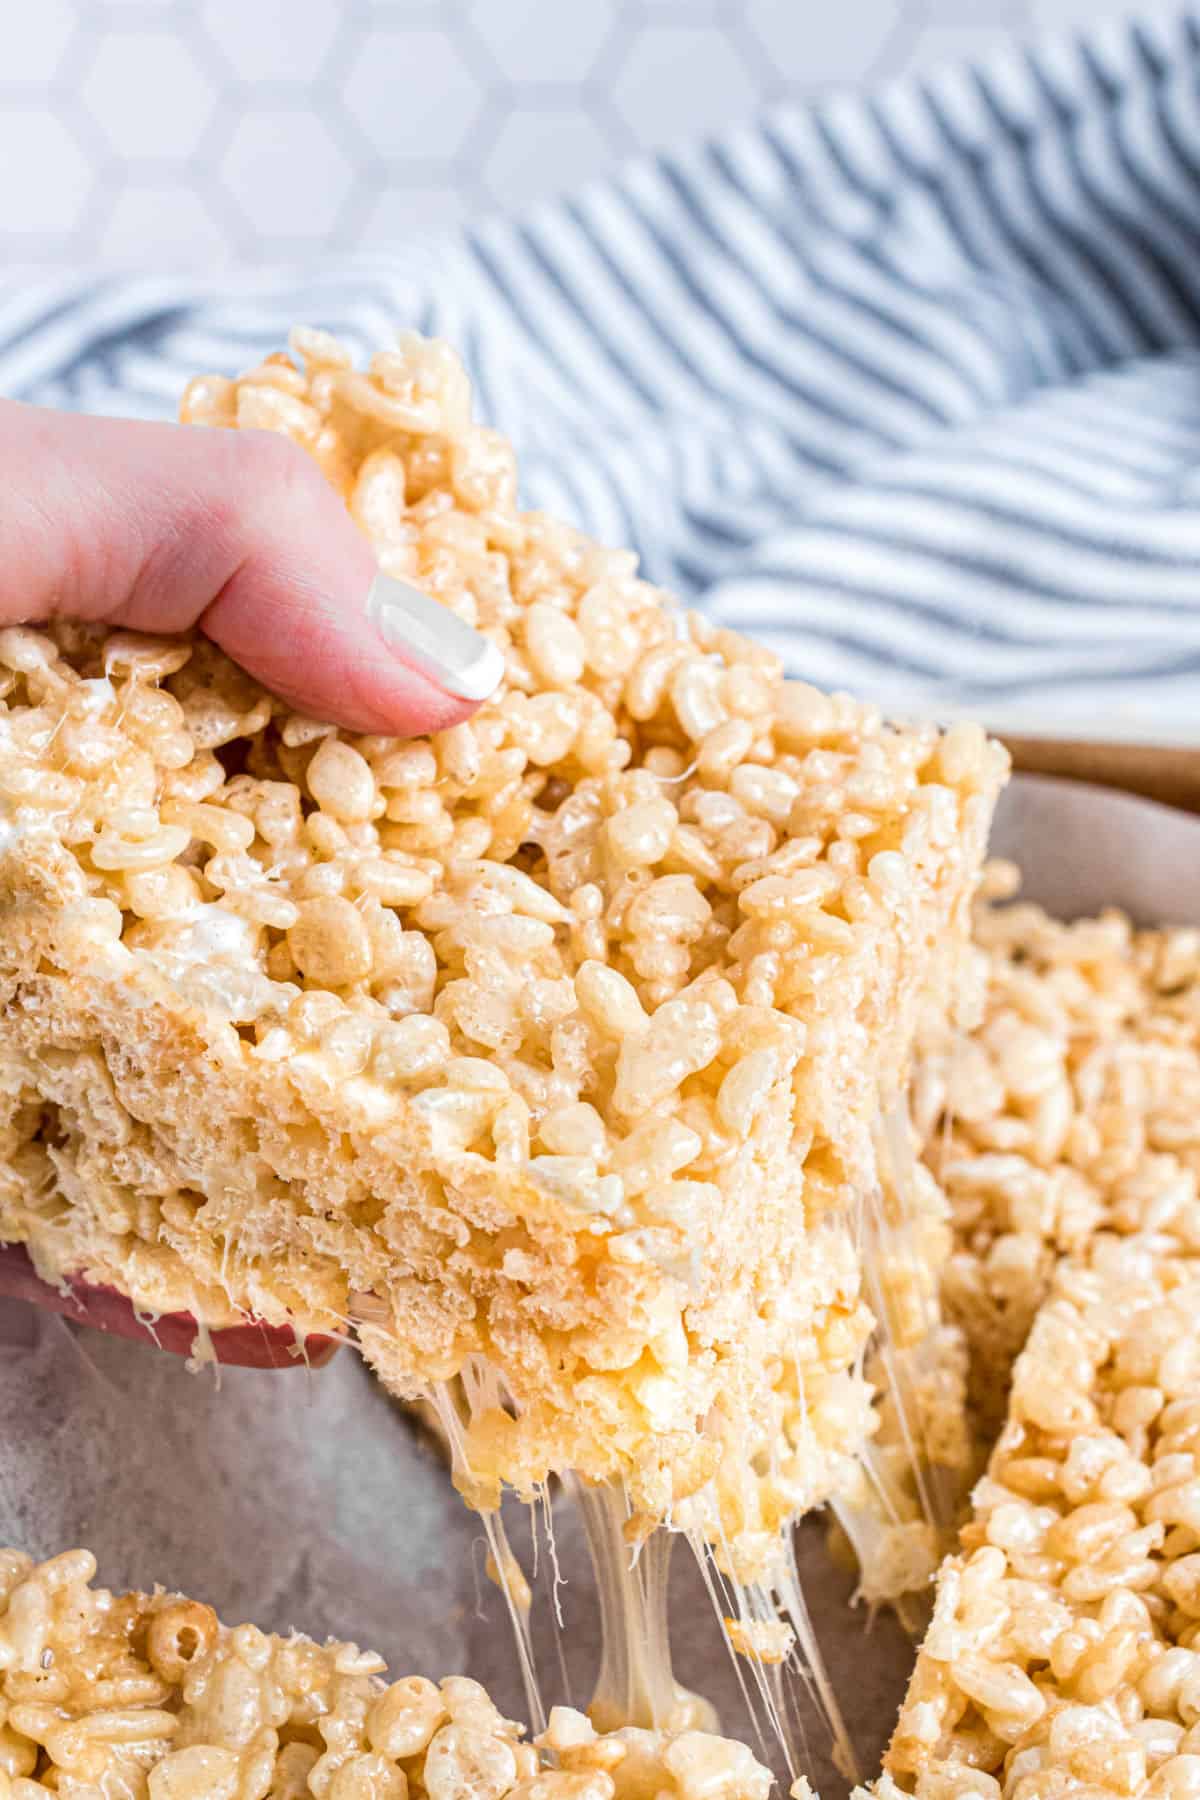 Gooey rice krispie treat being pulled out of the baking dish.